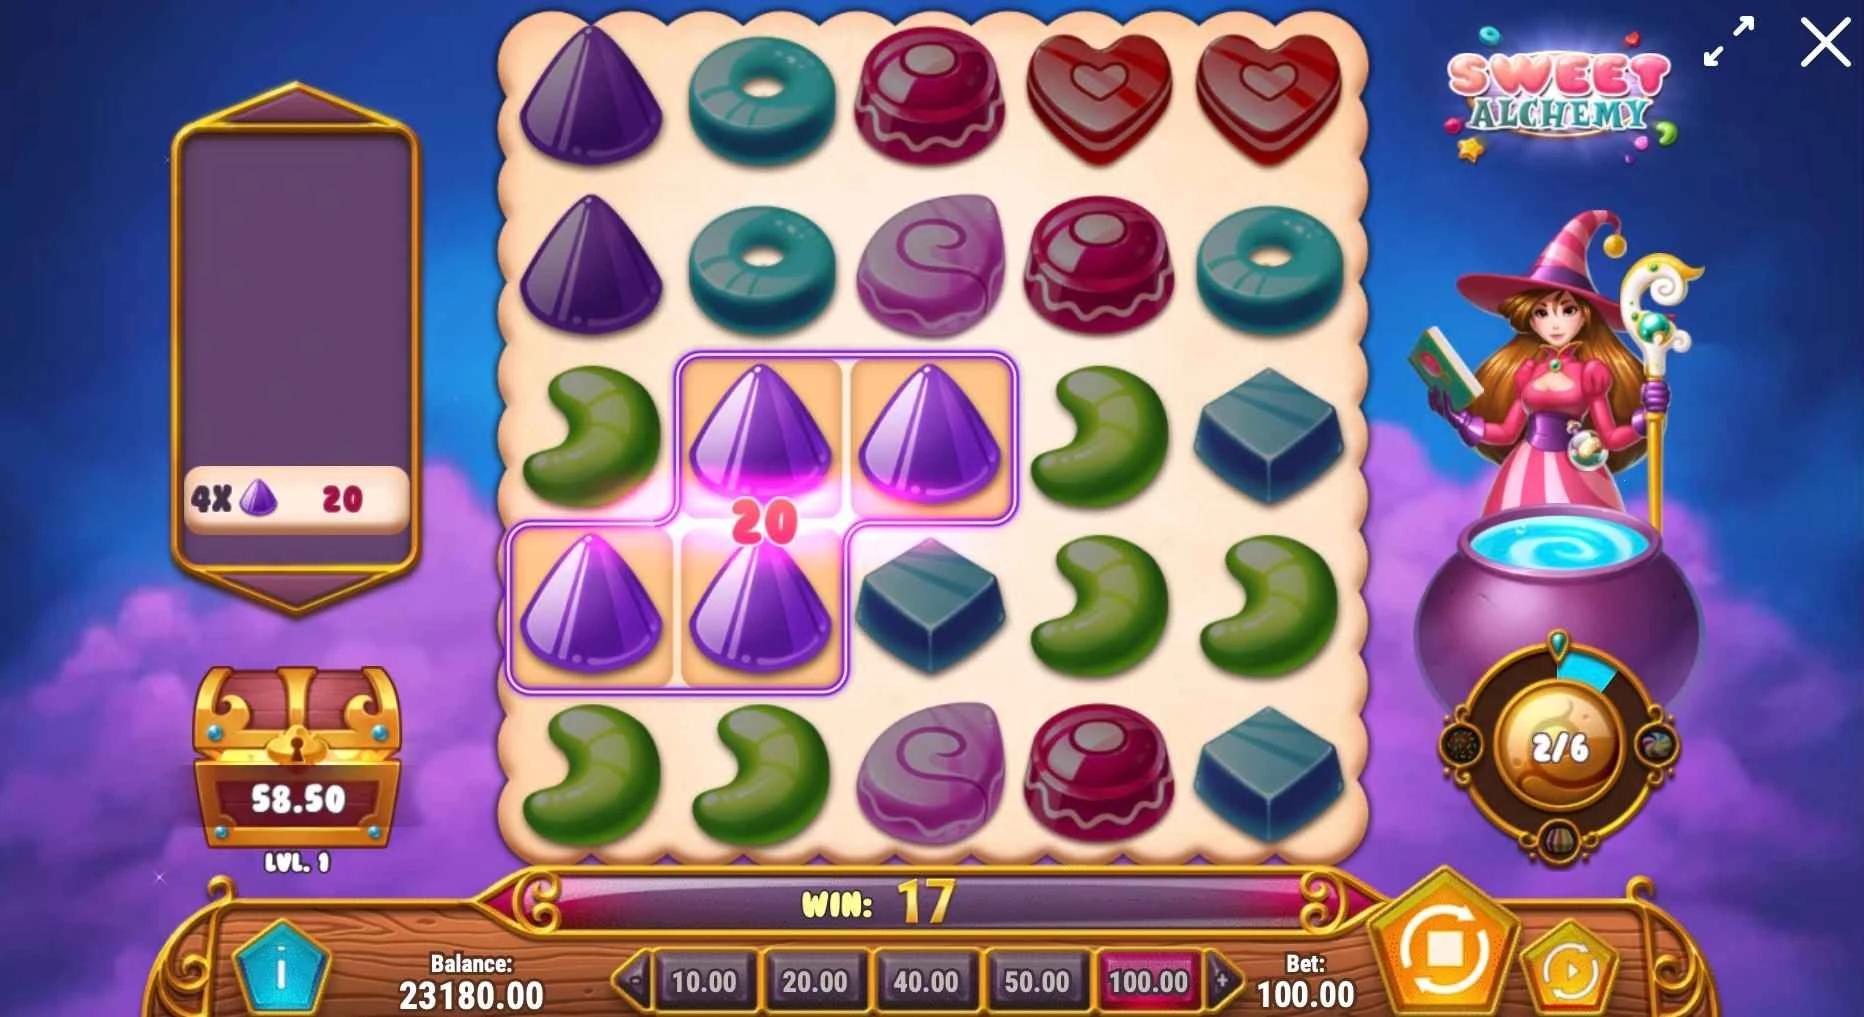 Sweet Alchemy Slot by Play'n Go - Online